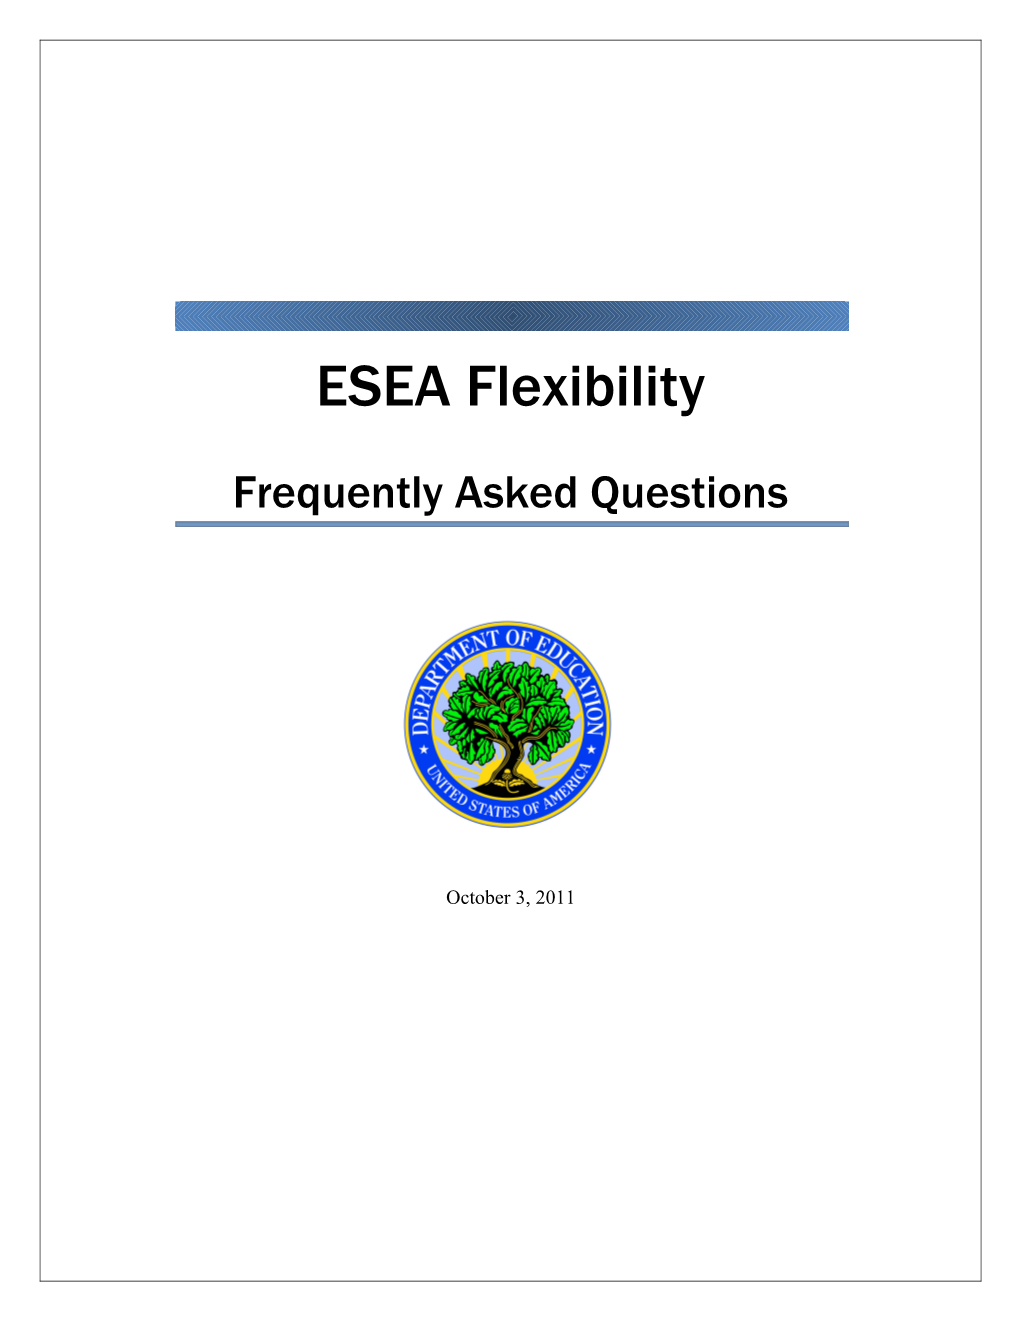 ESEA Flexibility: Frequently Asked Questions October 3, 2011 (MS Word)